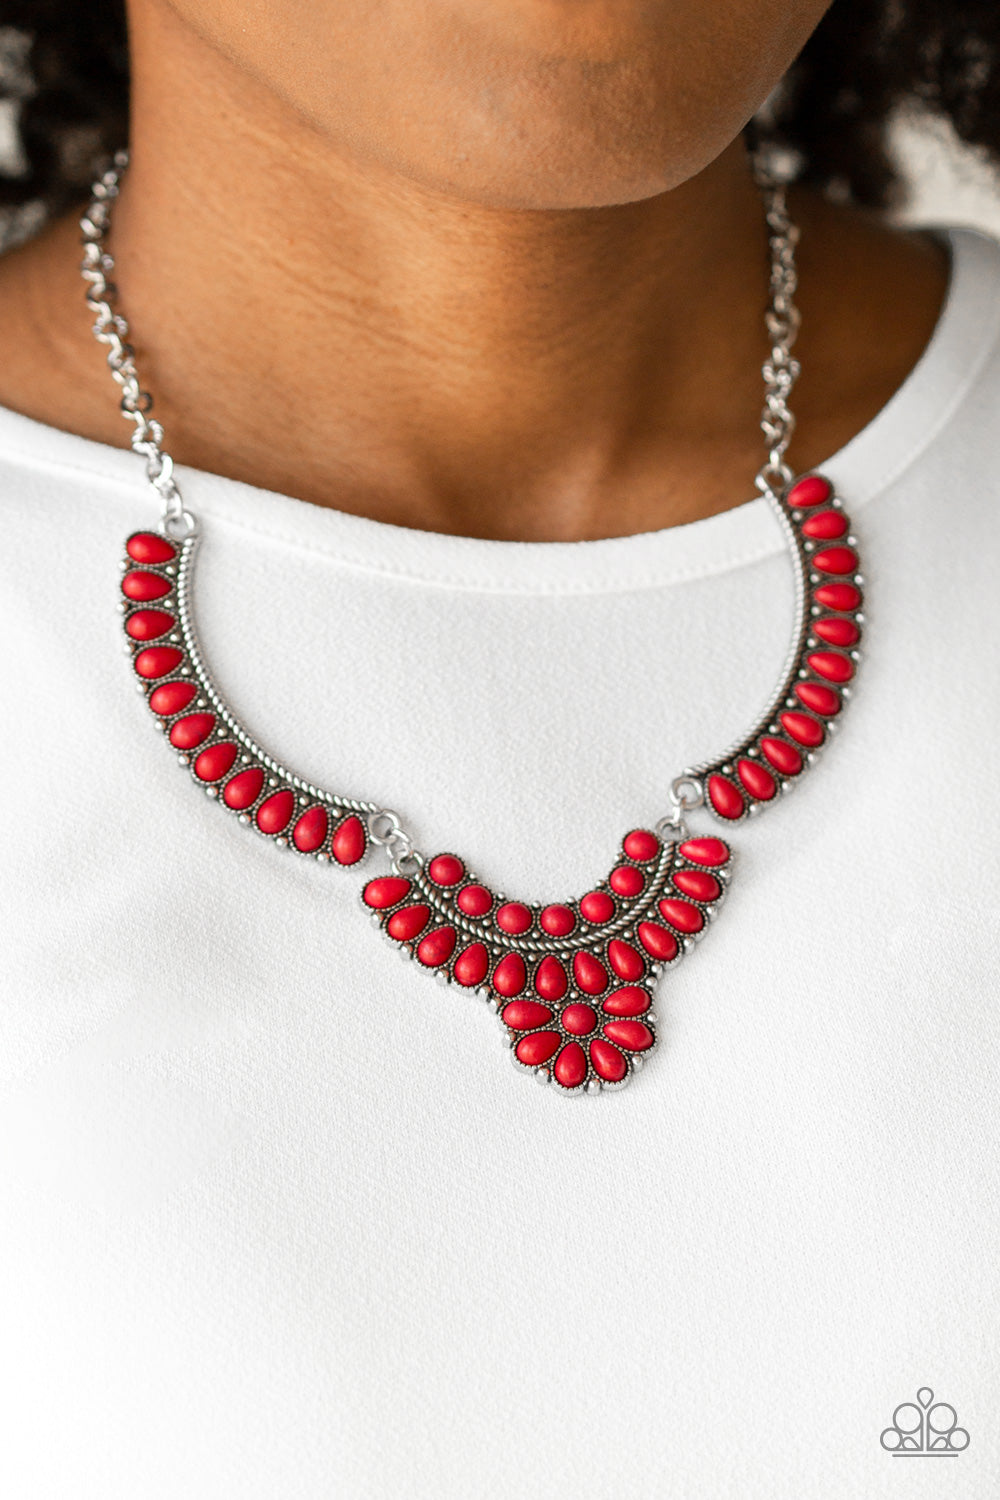 Paparazzi Accessories - Omega Oasis - Red Necklace